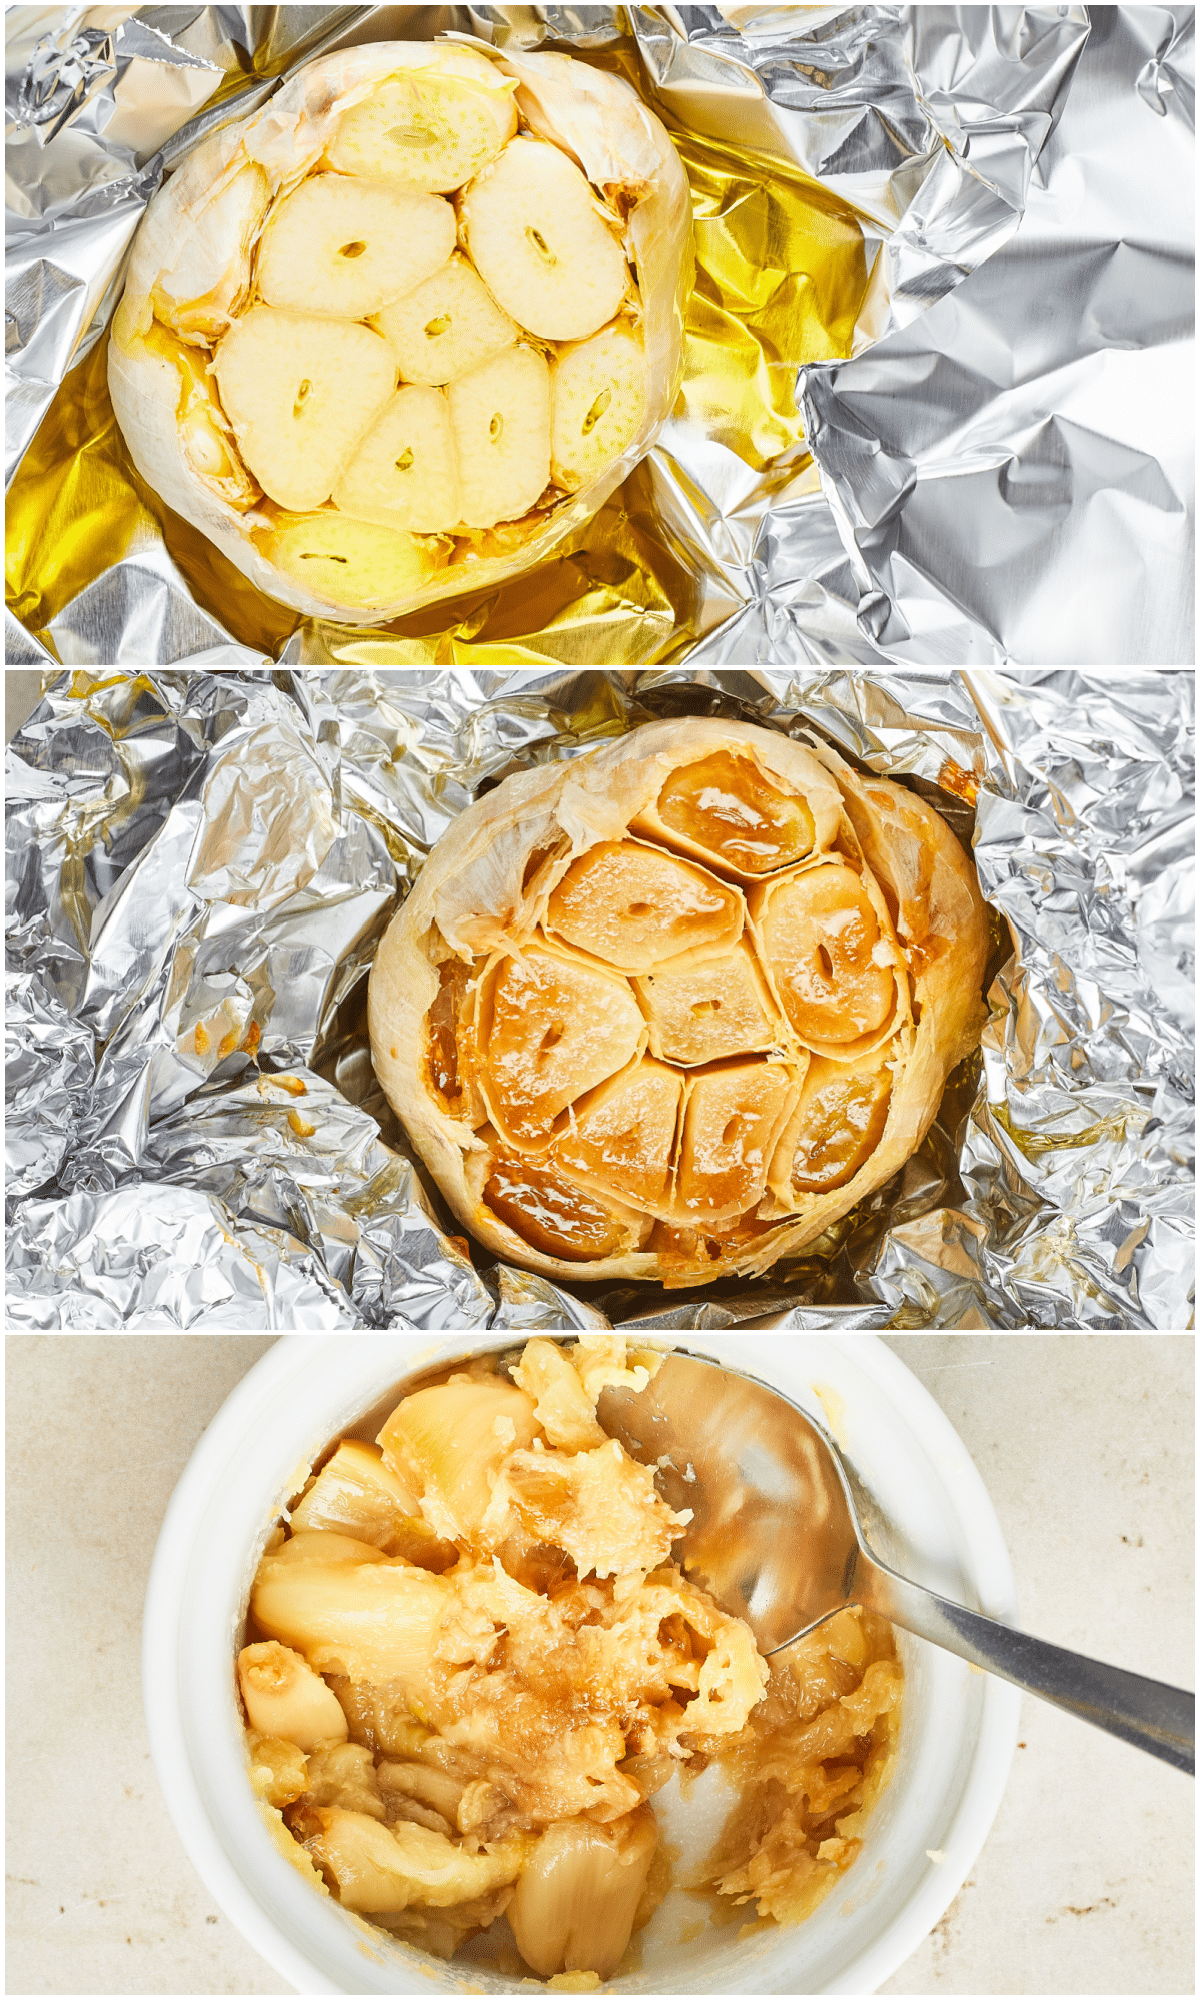 A three image collage shows how to roast garlic: slice top from garlic bulb, add olive oil and wrap with foil. Roast, then transfer garlic cloves to a bowl and mash.